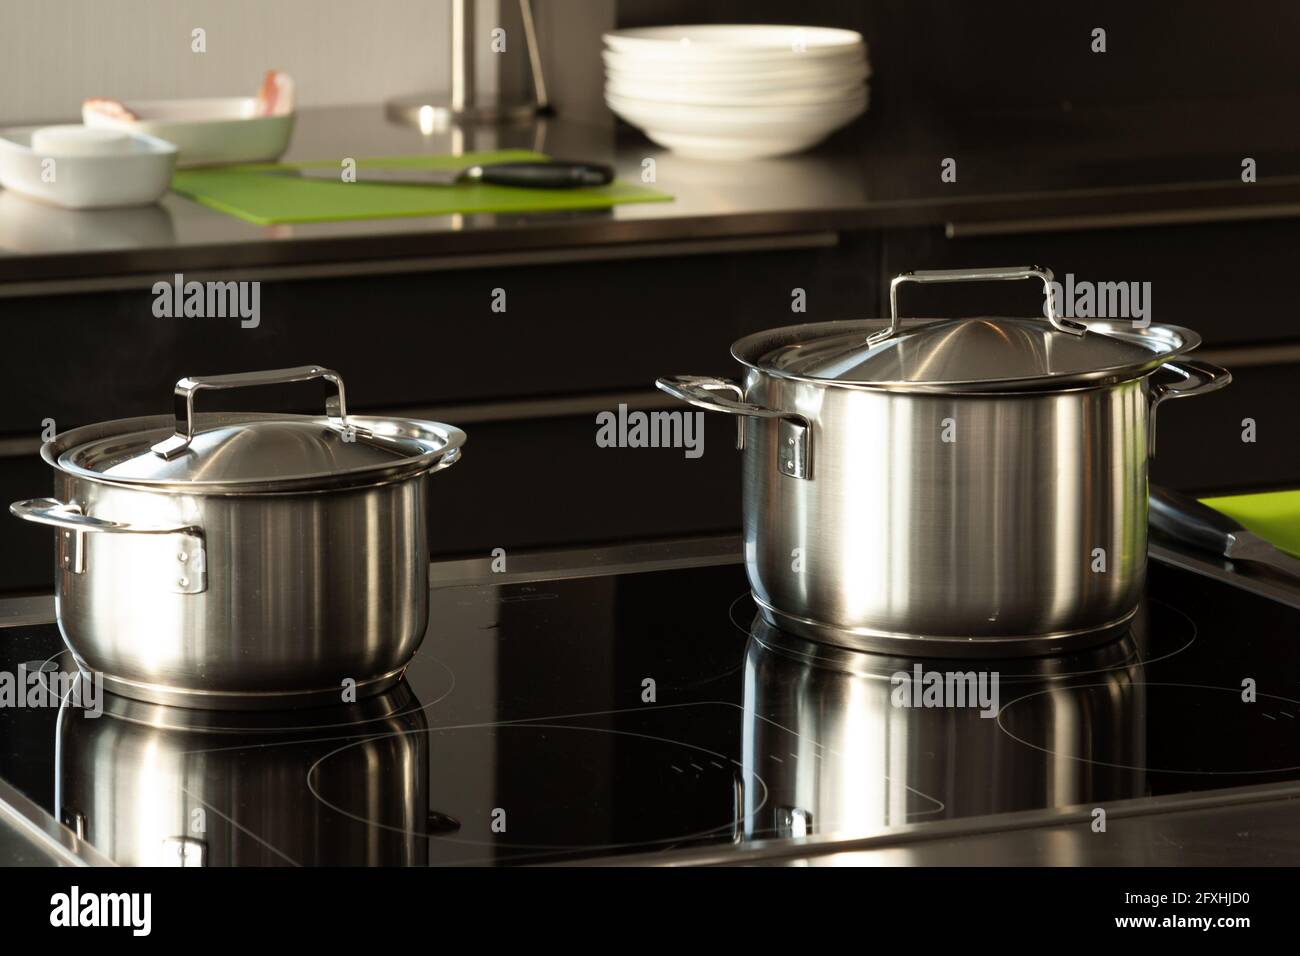 2 pots with lids are on a stove in the kitchen and are reflected in them. In the background are small plates, bowls and a knife. Stock Photo